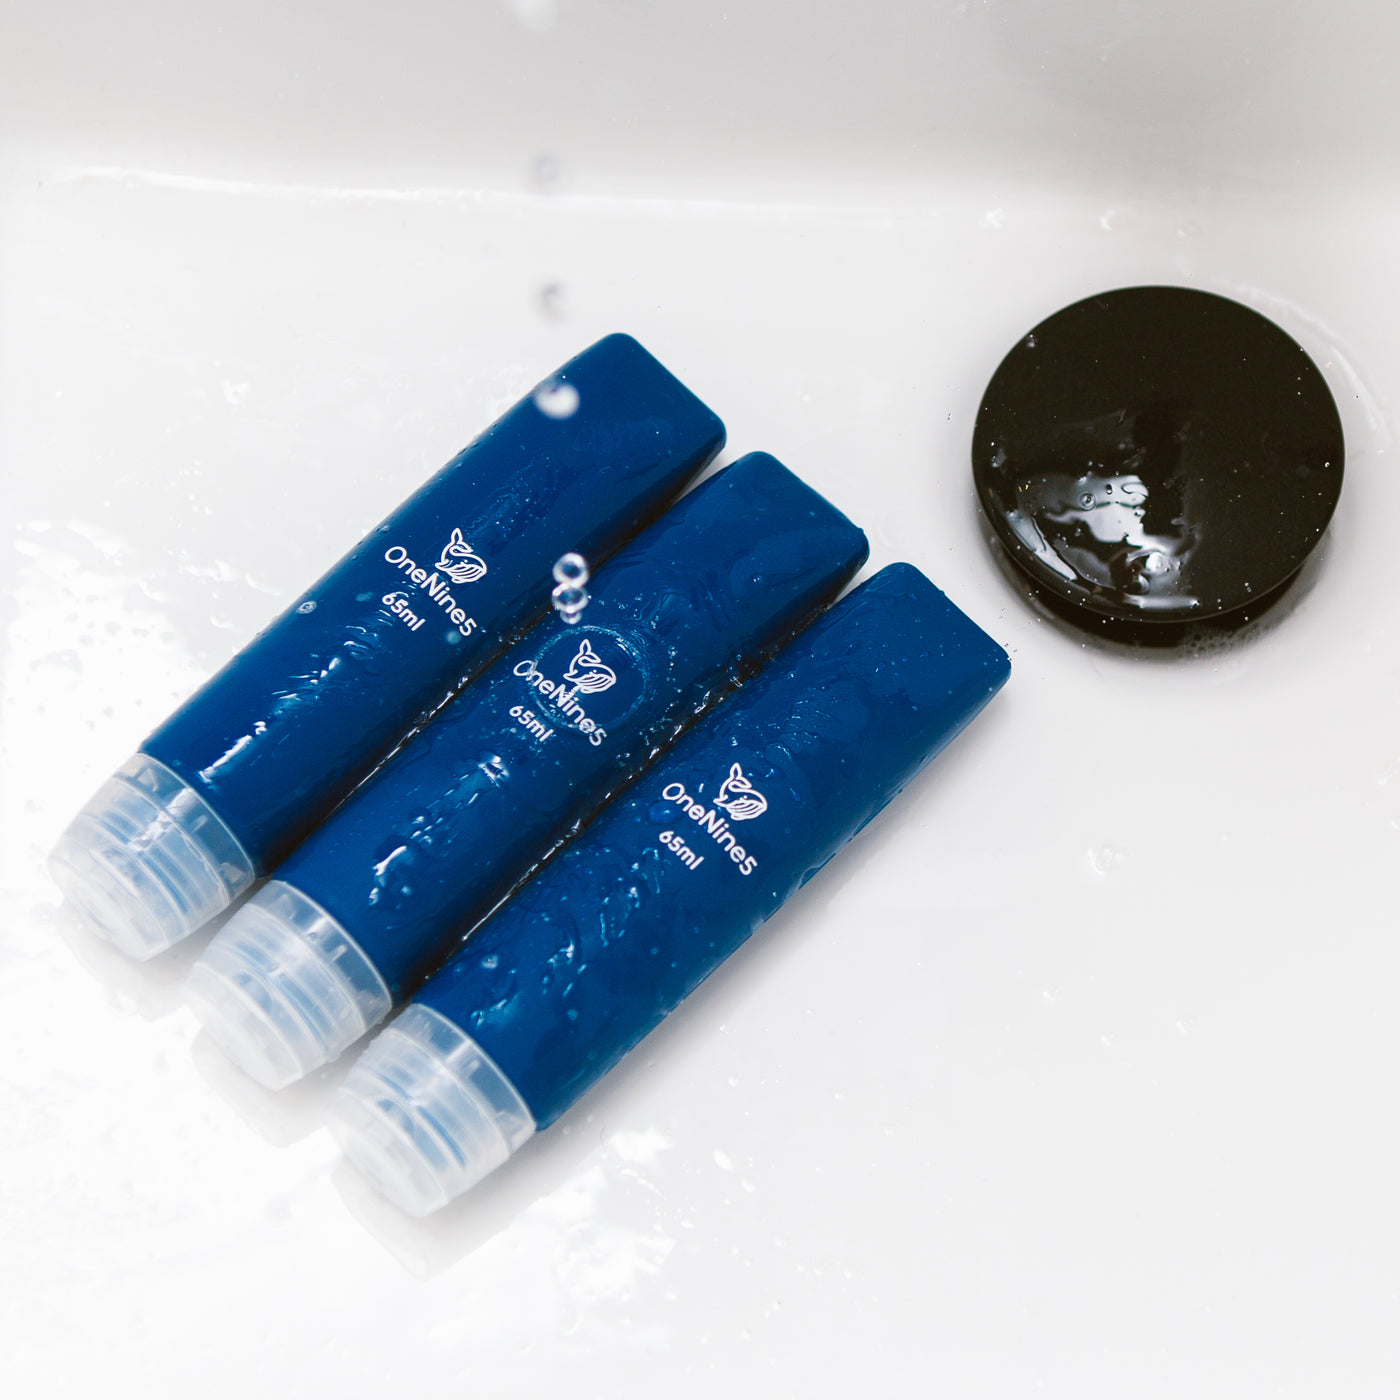 three blue silicone travel bottles in the bathroom sink. A black OneNine5 logo is visible on the reusable bottles and they are being splashed with water